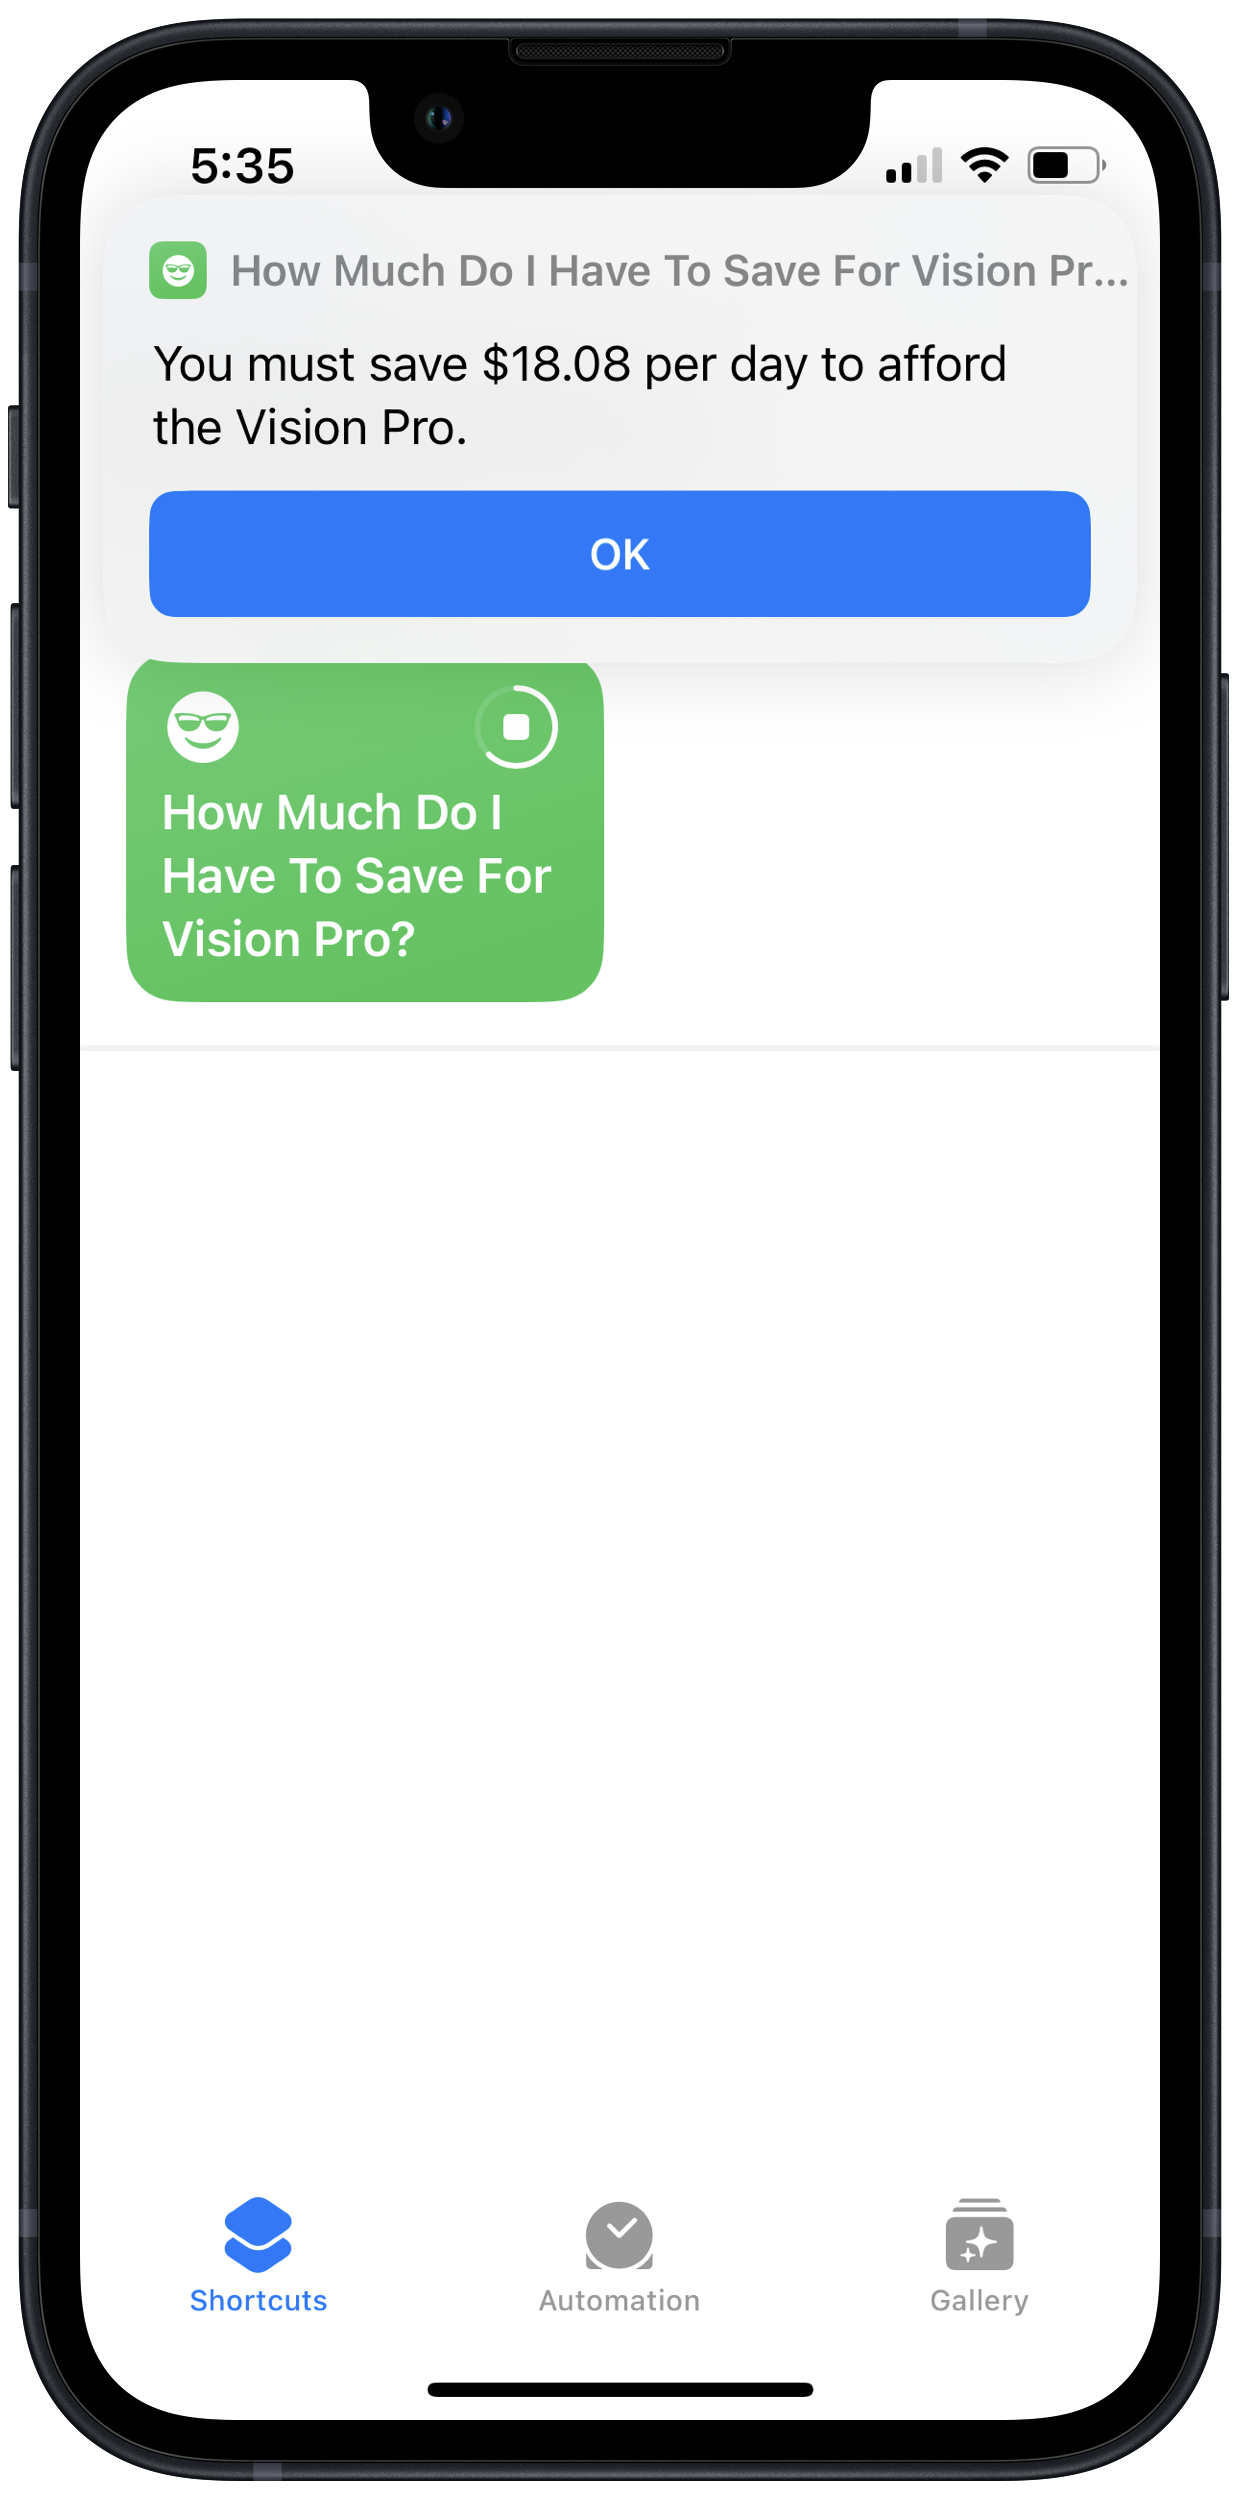 A shortcut showing you have to save $18.08 per day to afford the Vision Pro.